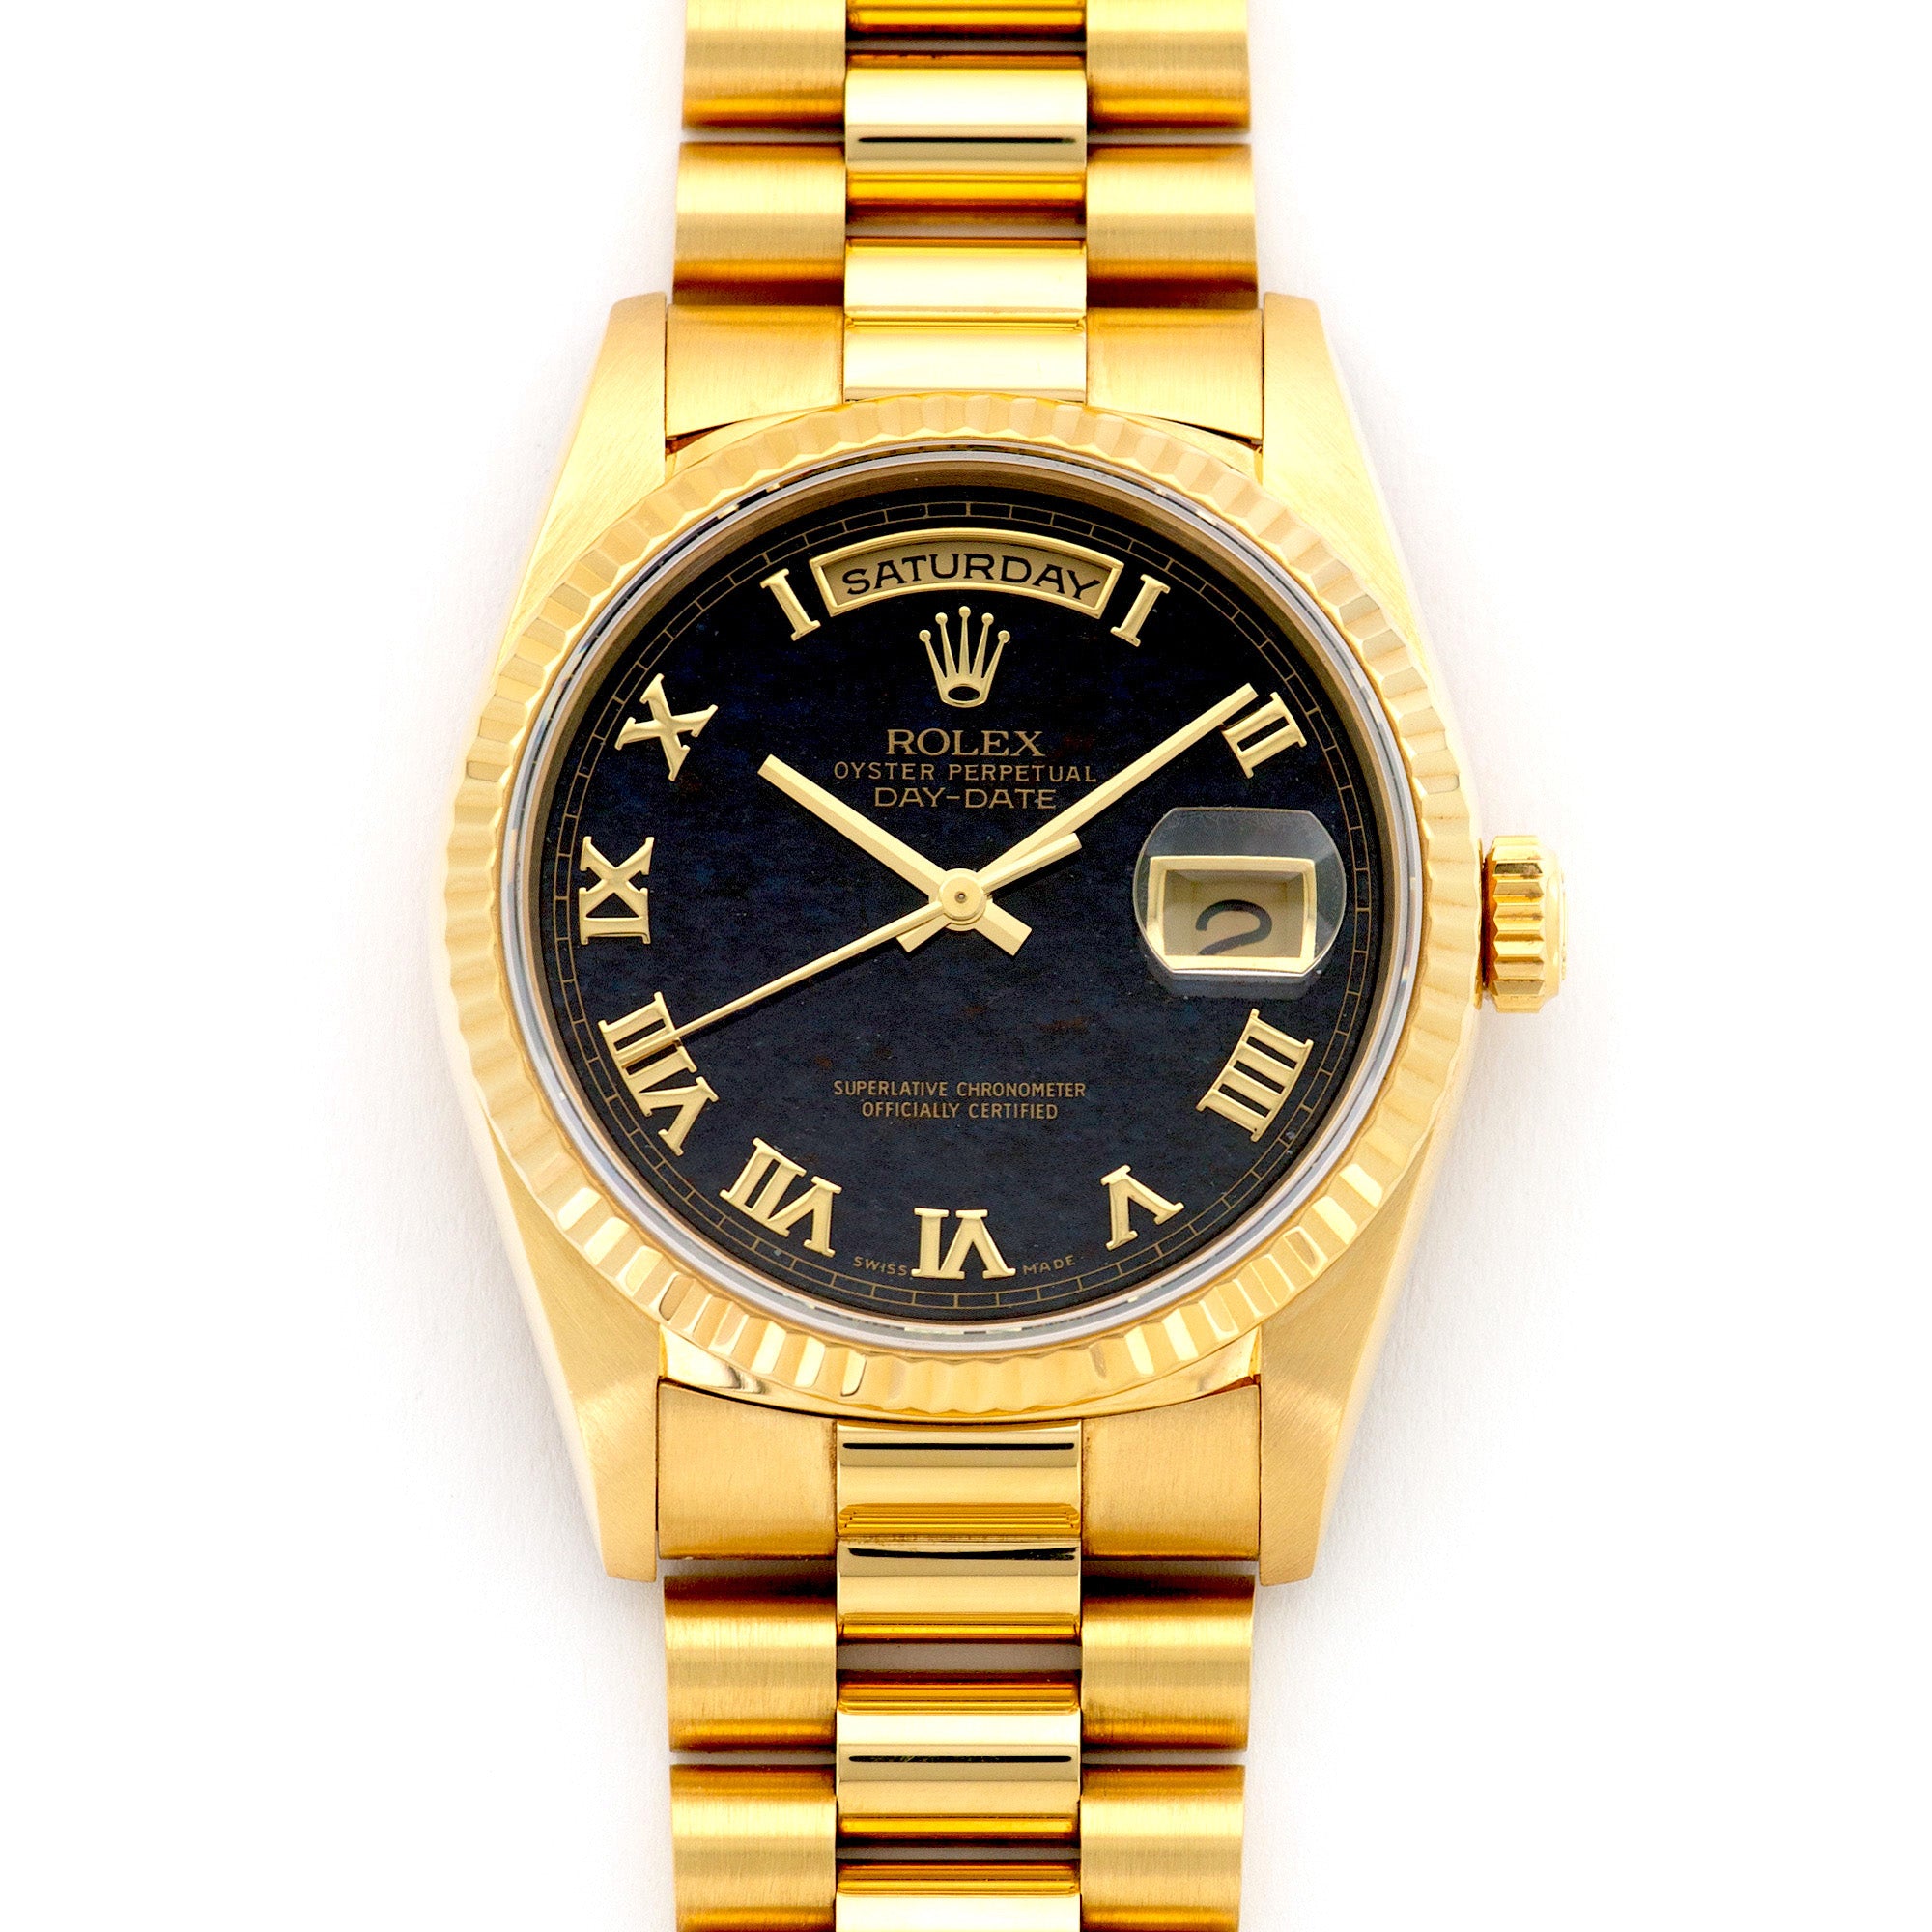 Rolex - Rolex Yellow Gold Day-Date Ferrite Stone Dial Watch Ref. 18238 - The Keystone Watches